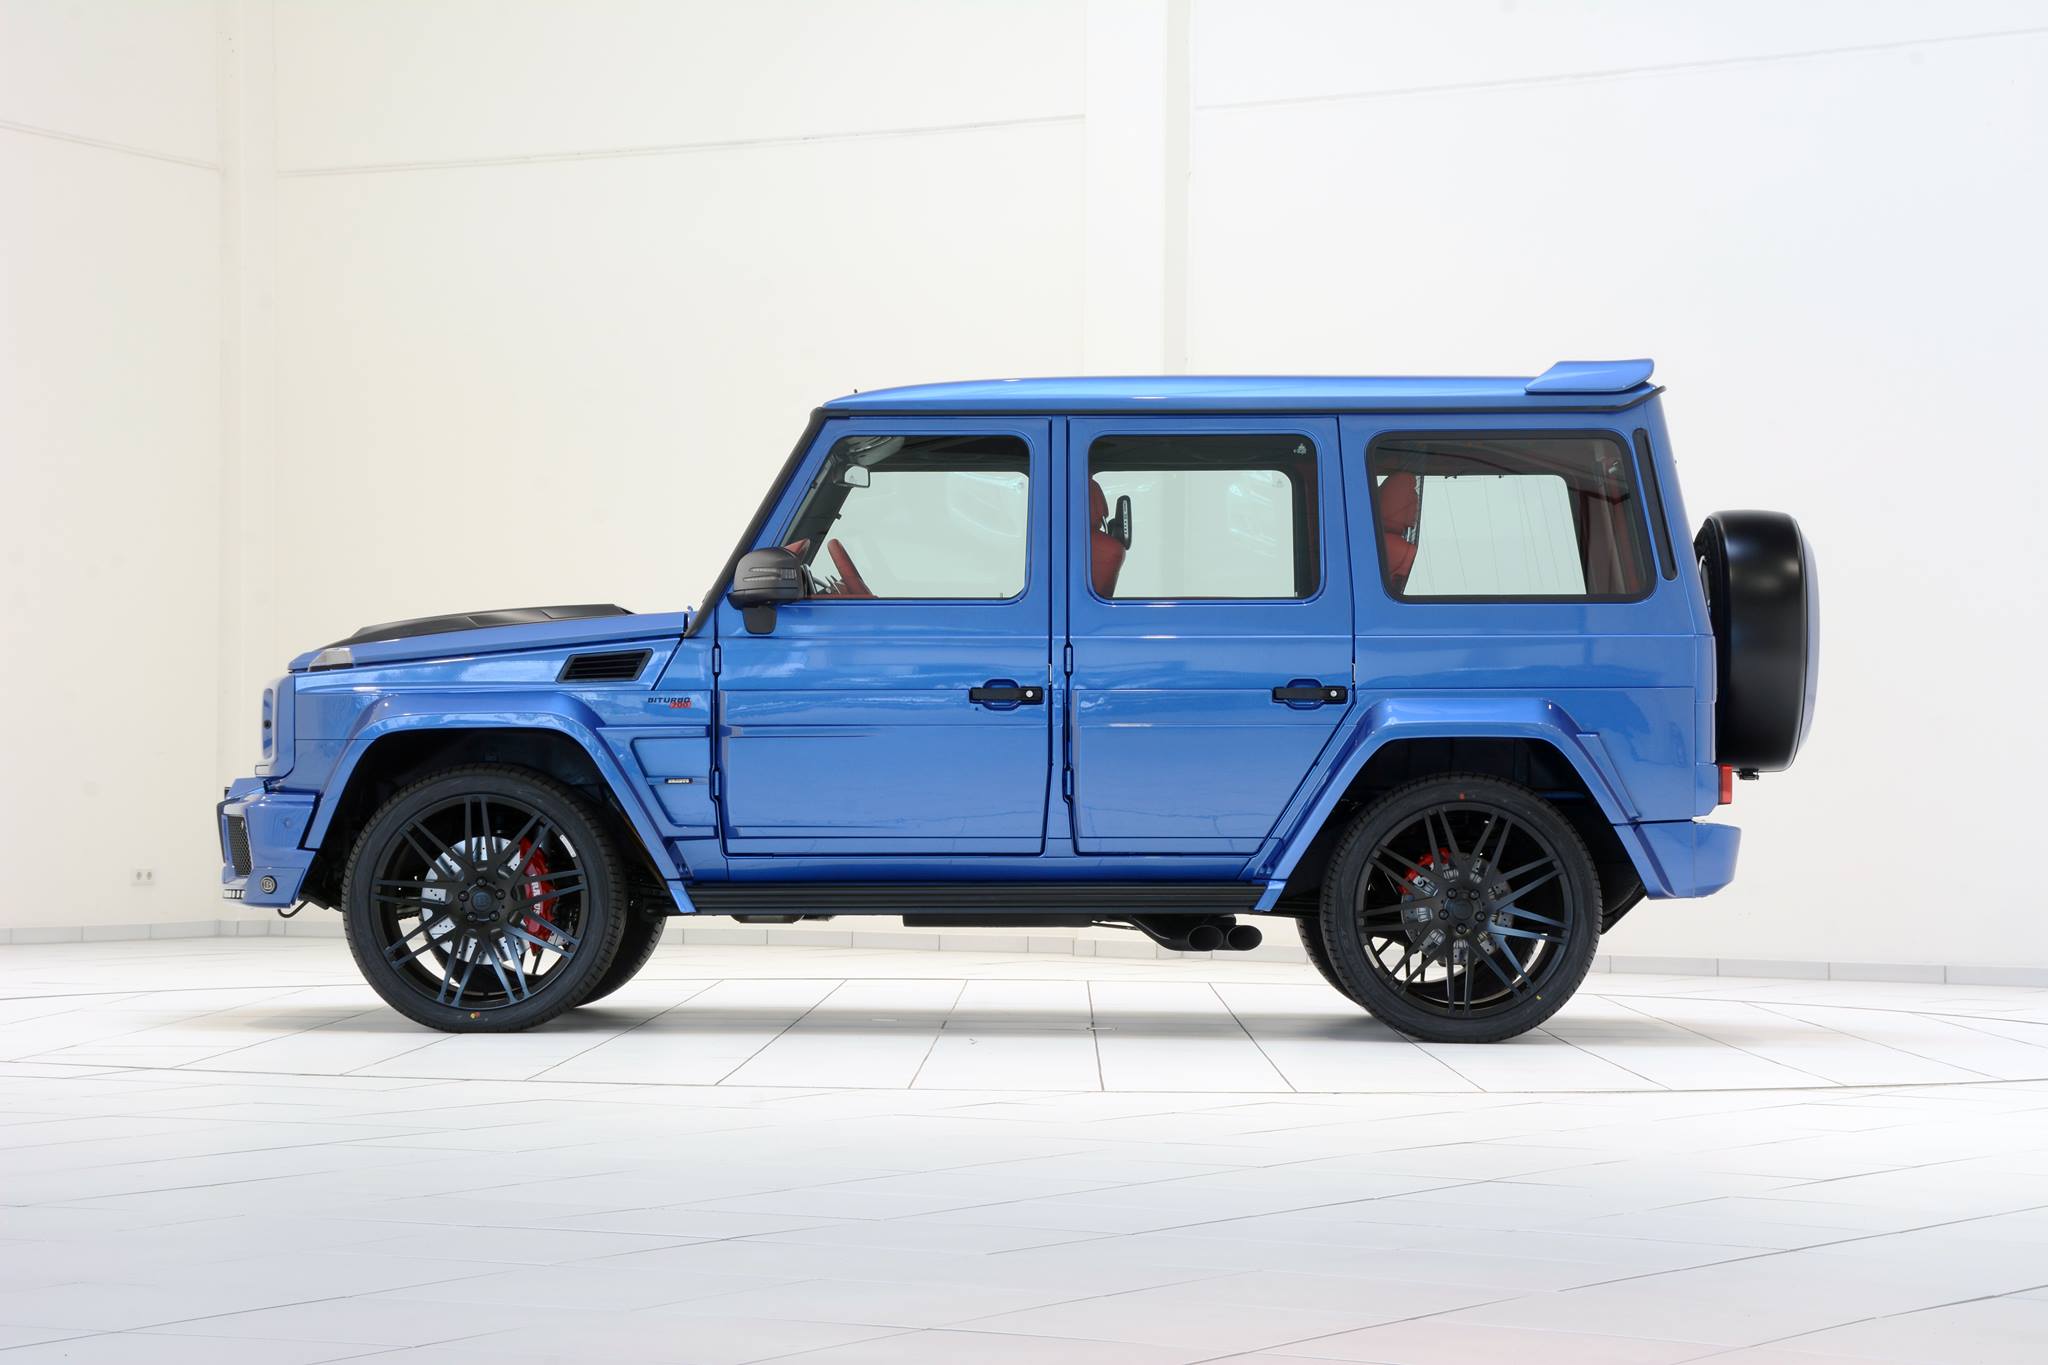 brabus-700-hp-g63-amg-combines-blue-paint-and-red-leather_9-autonovosti.me-7